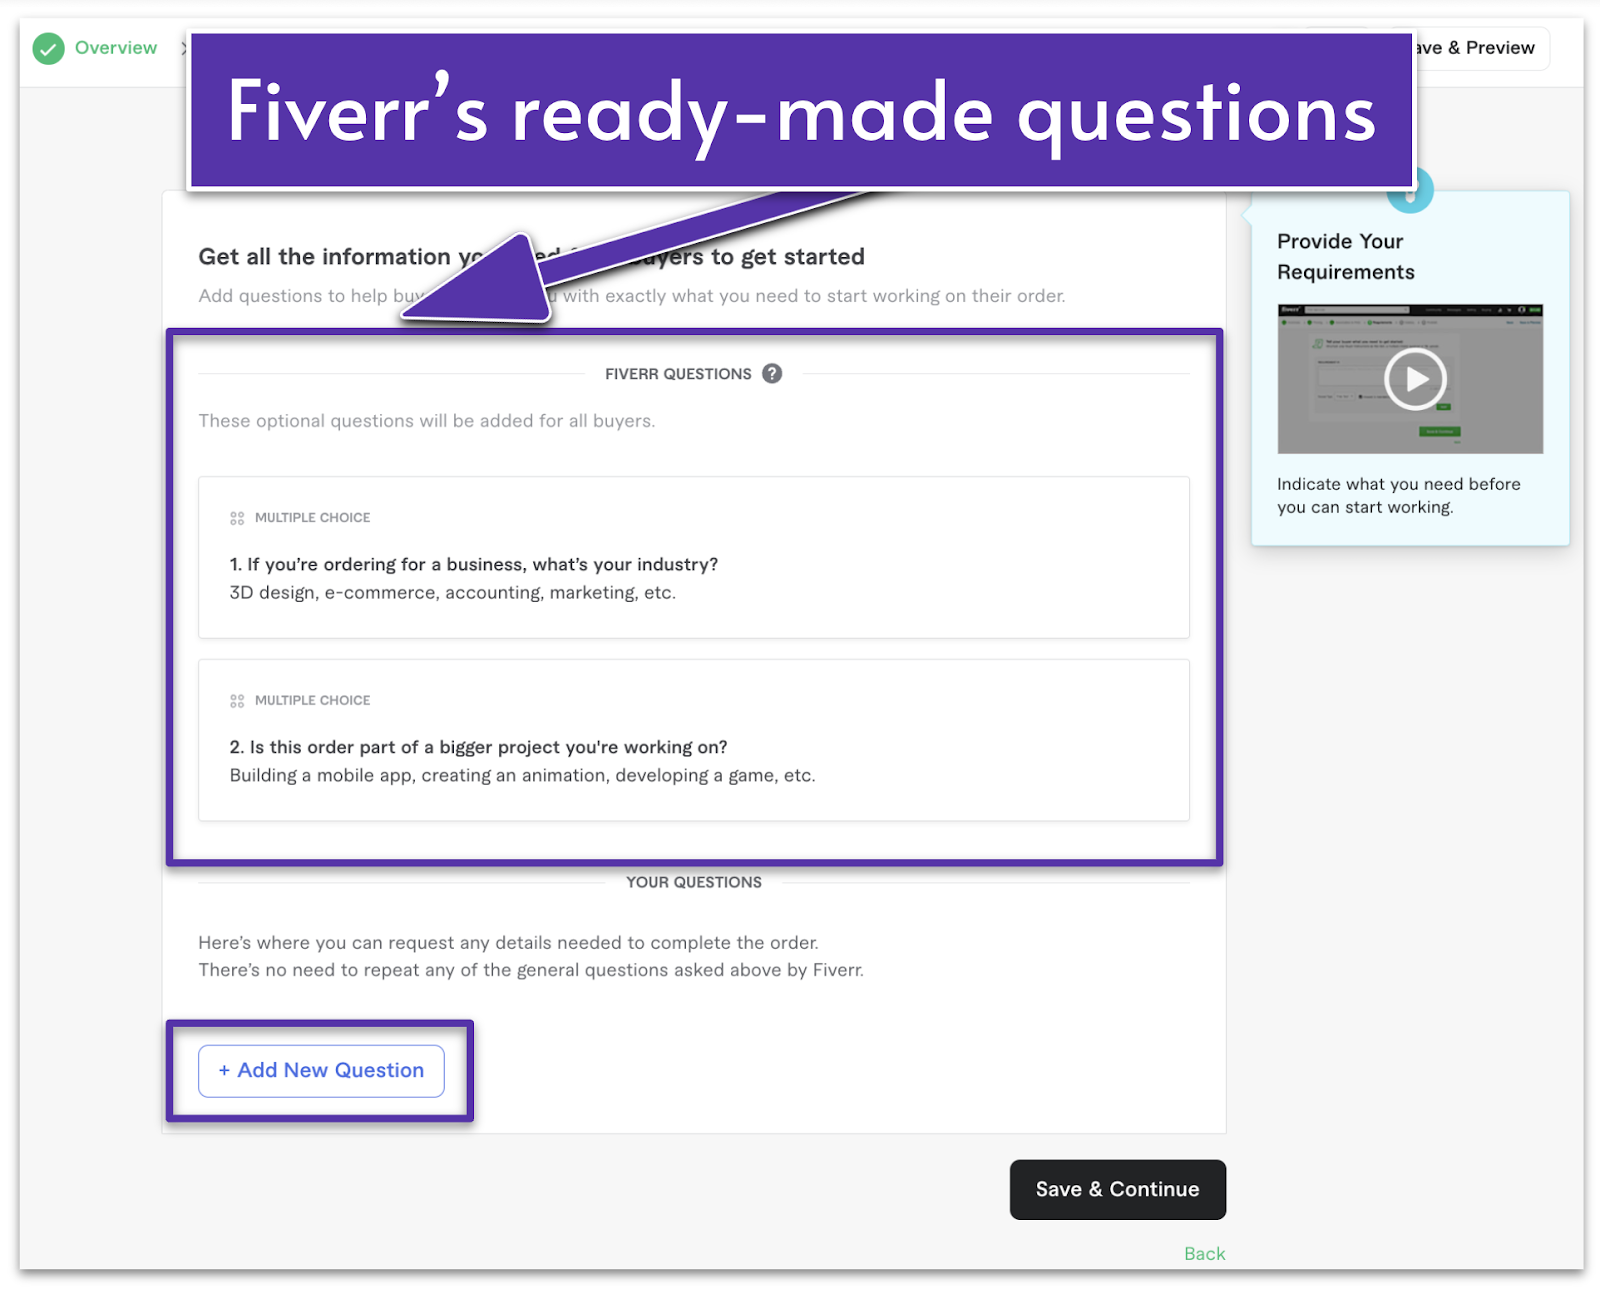 Fiverr ready-made job requirement questions